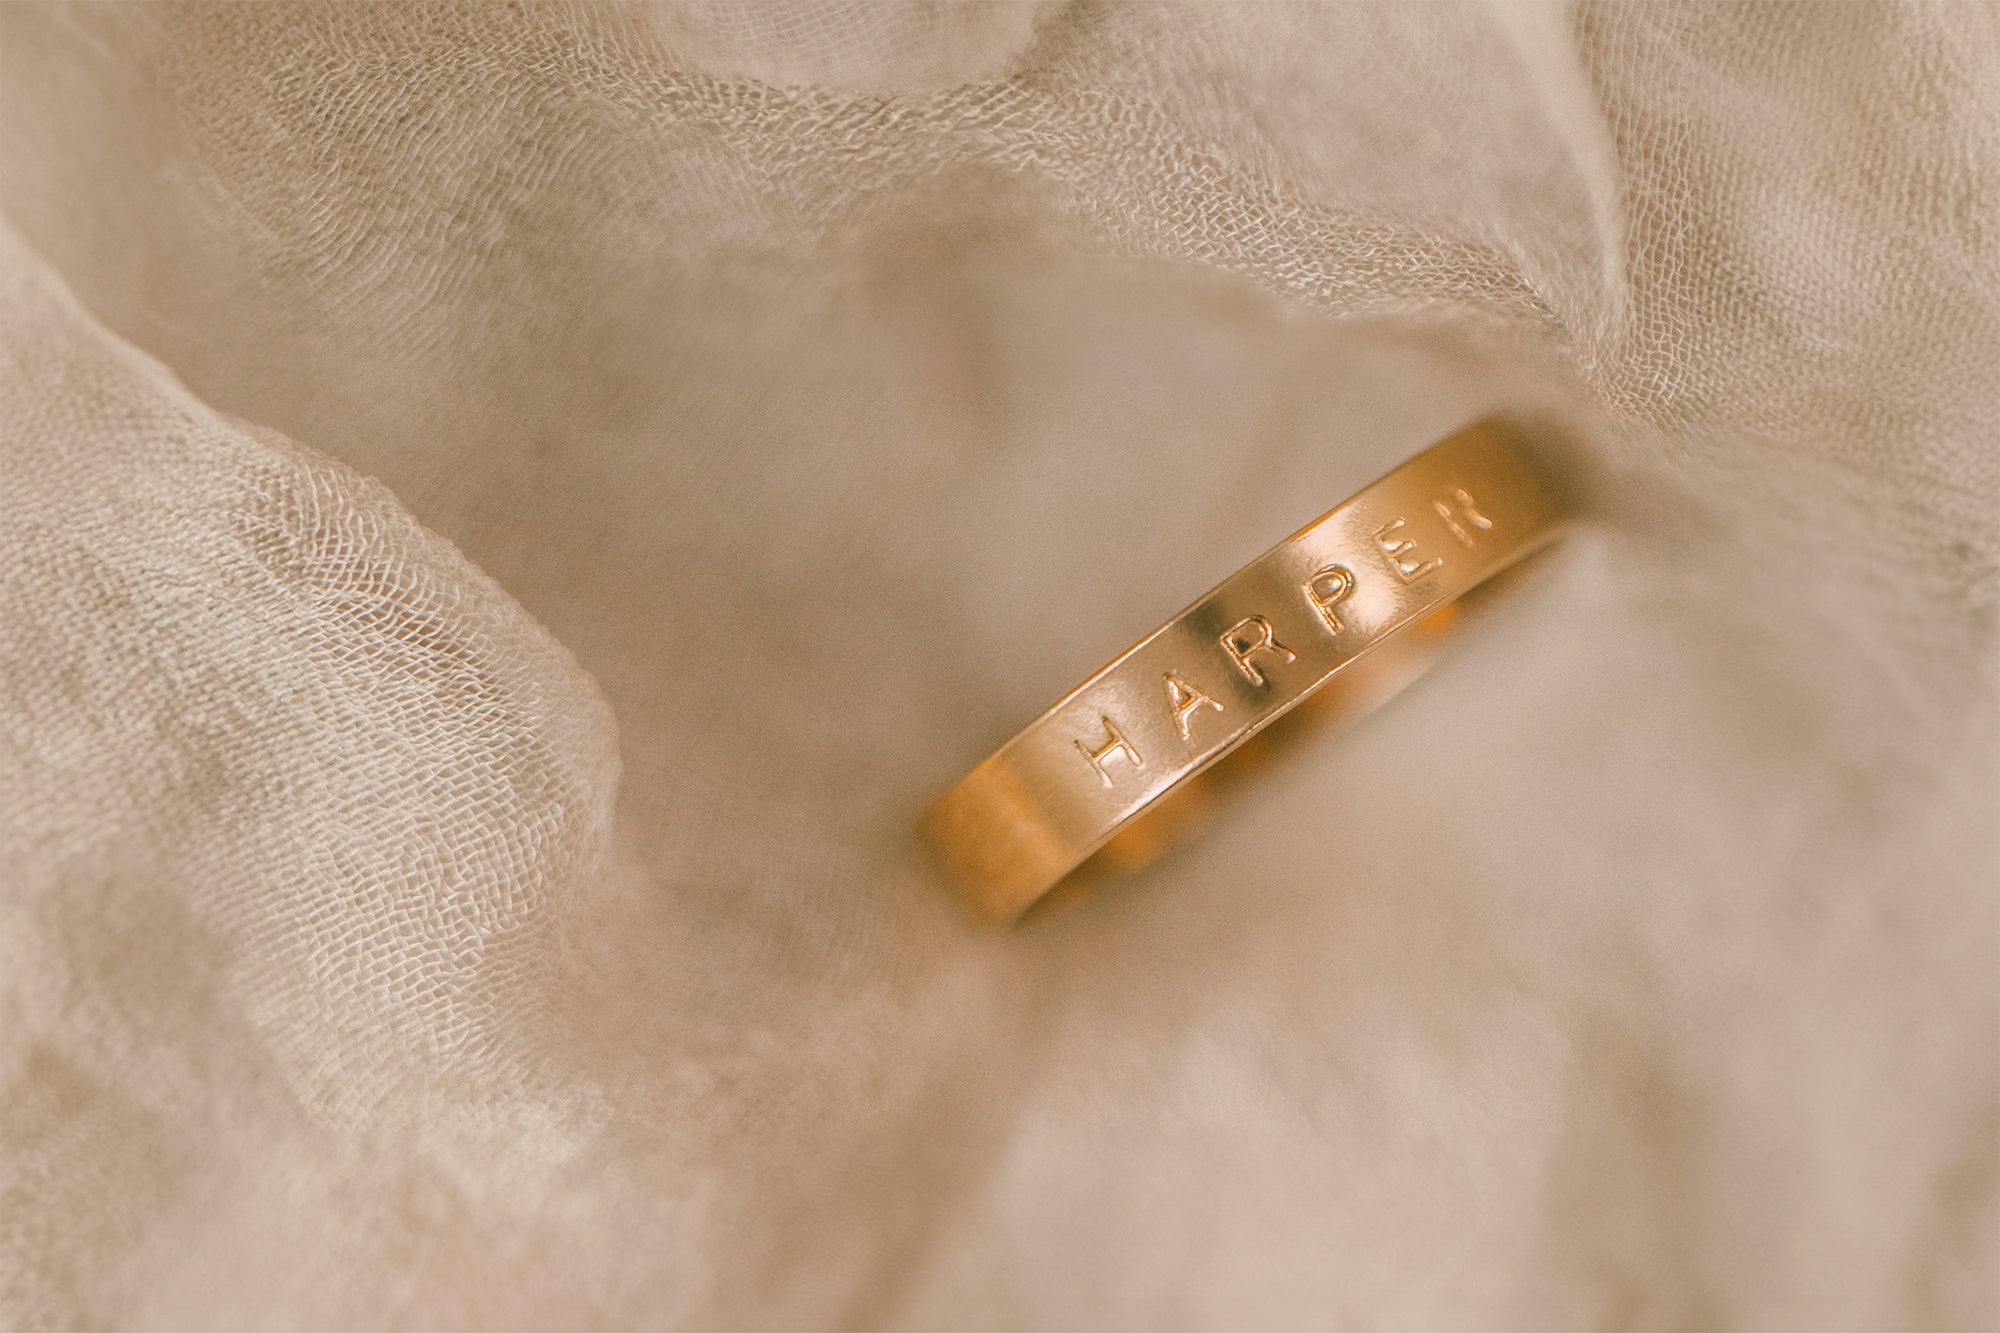 Amara Customized Rings - A Personal Touch